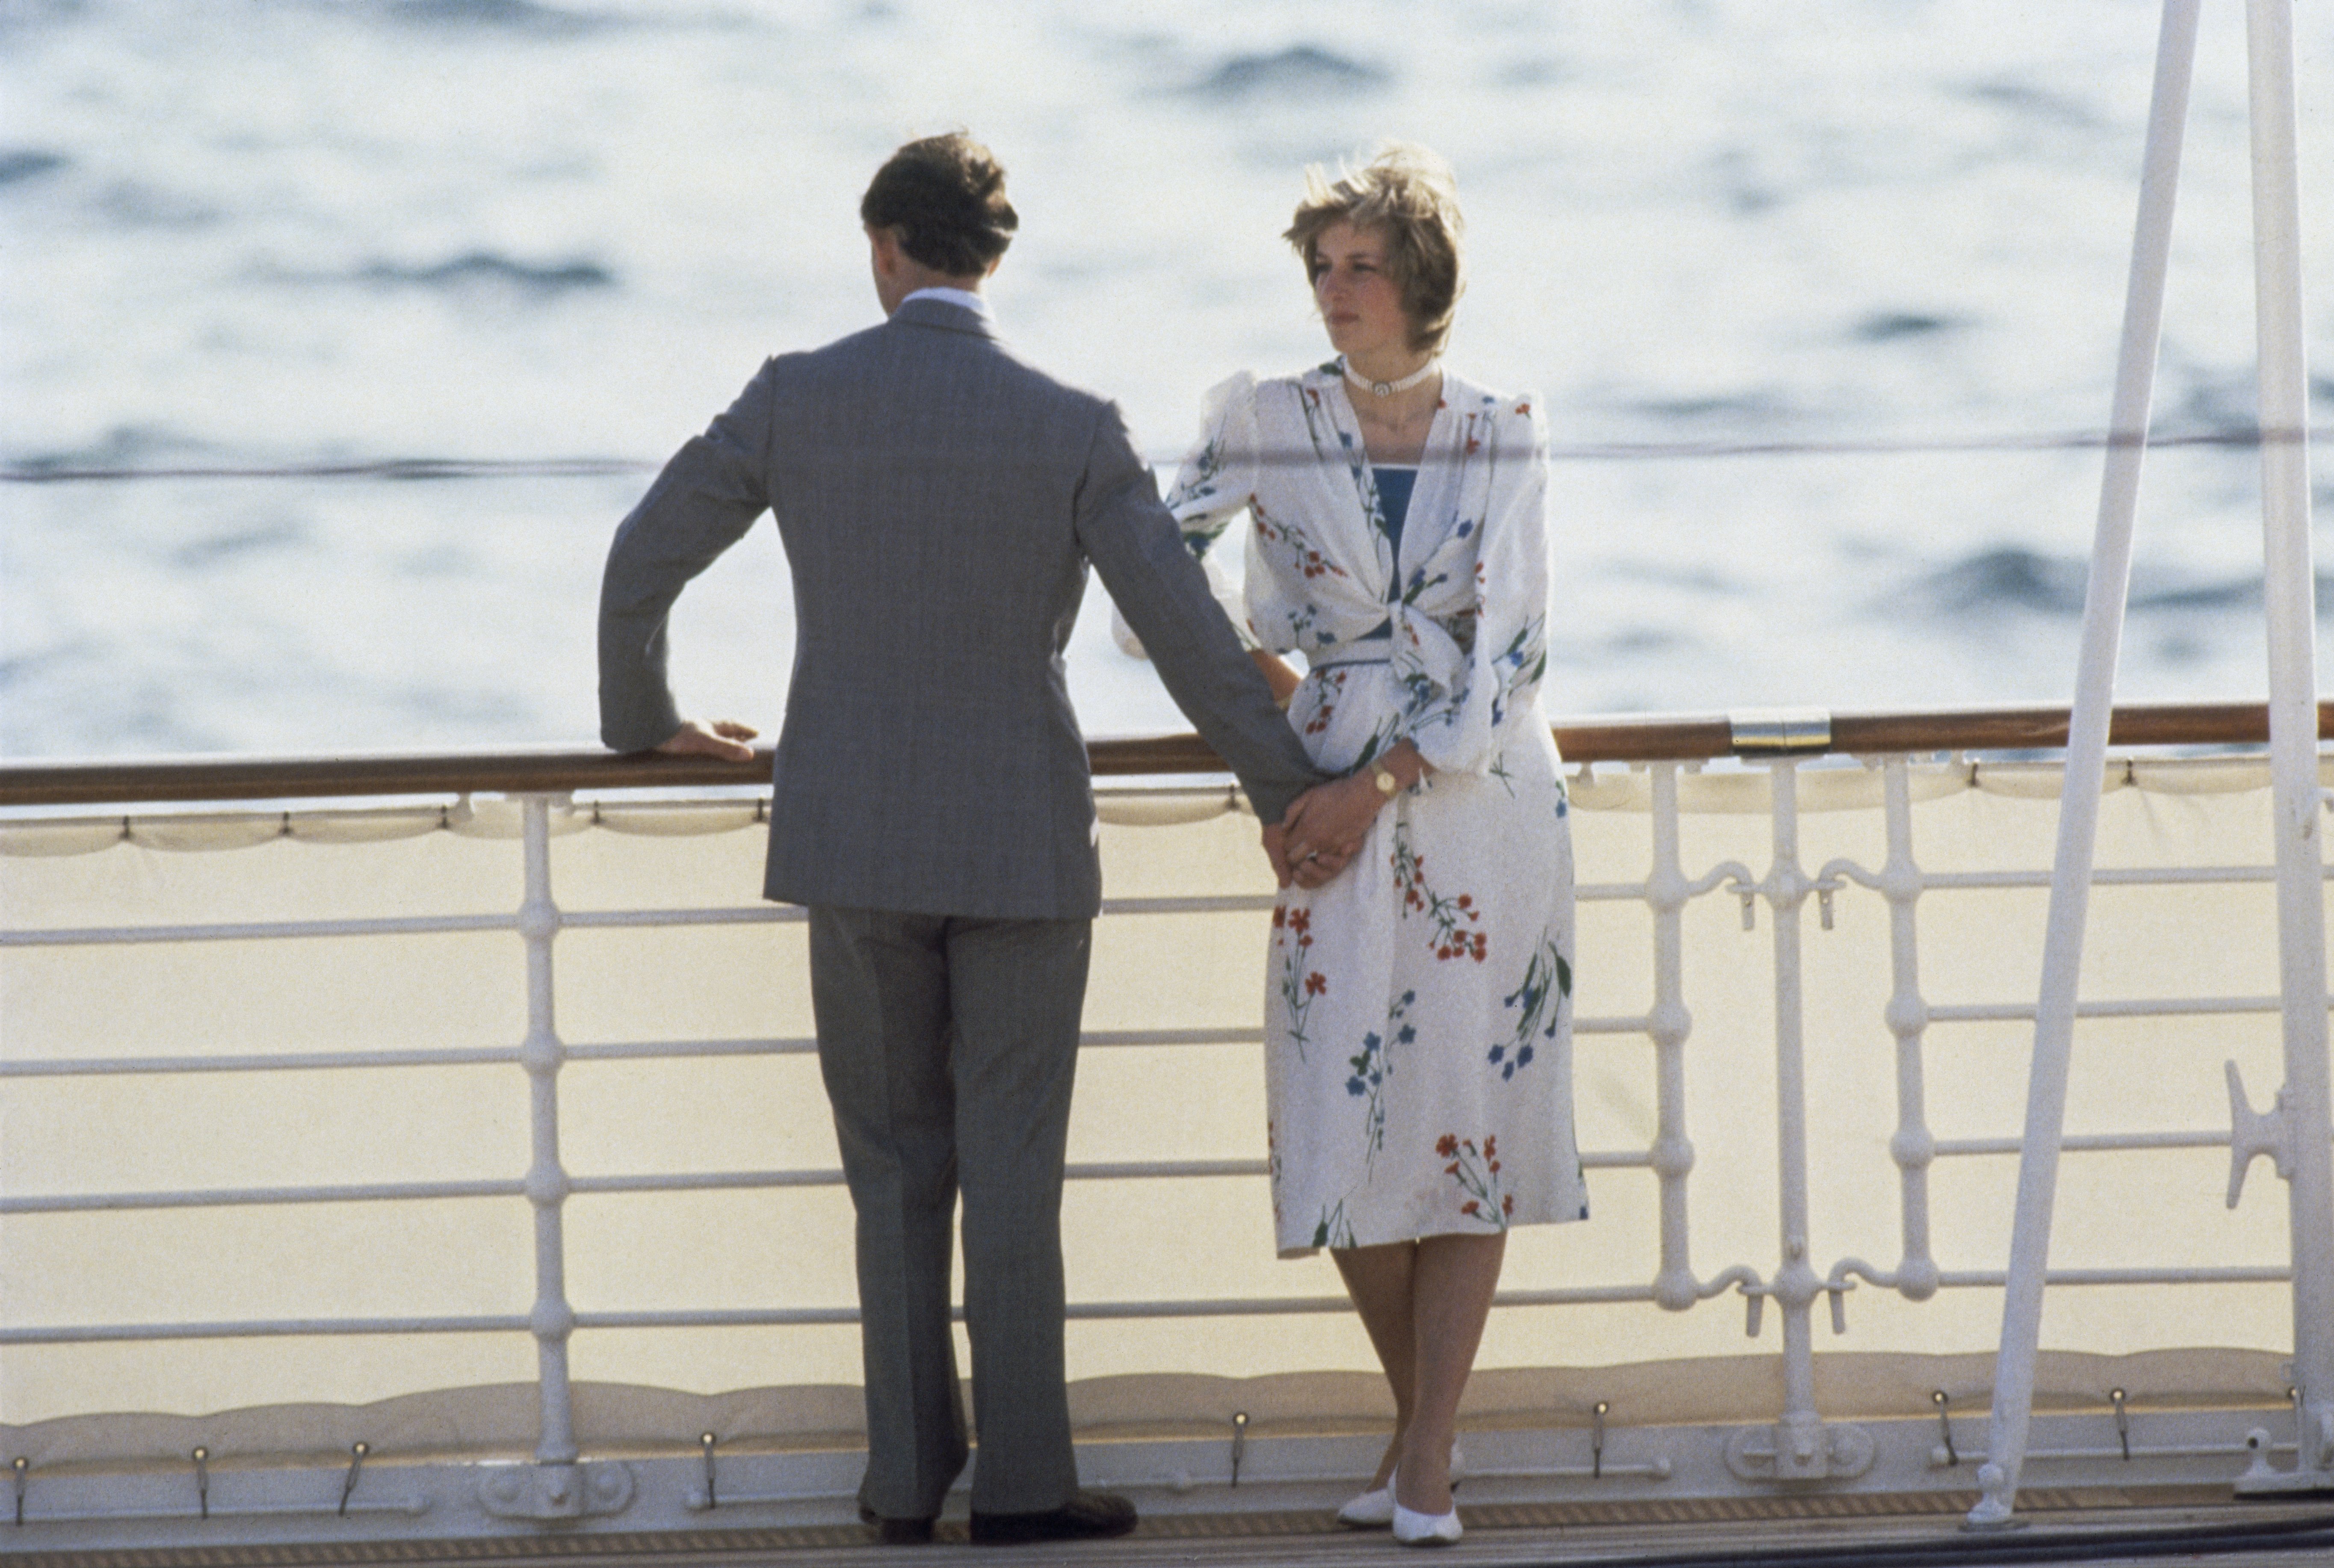 Prince Charles and Princess Diana leave Gibraltar on the Royal Yacht Britannia for their honeymoon cruise on August 1, 1981. / Source: Getty Images